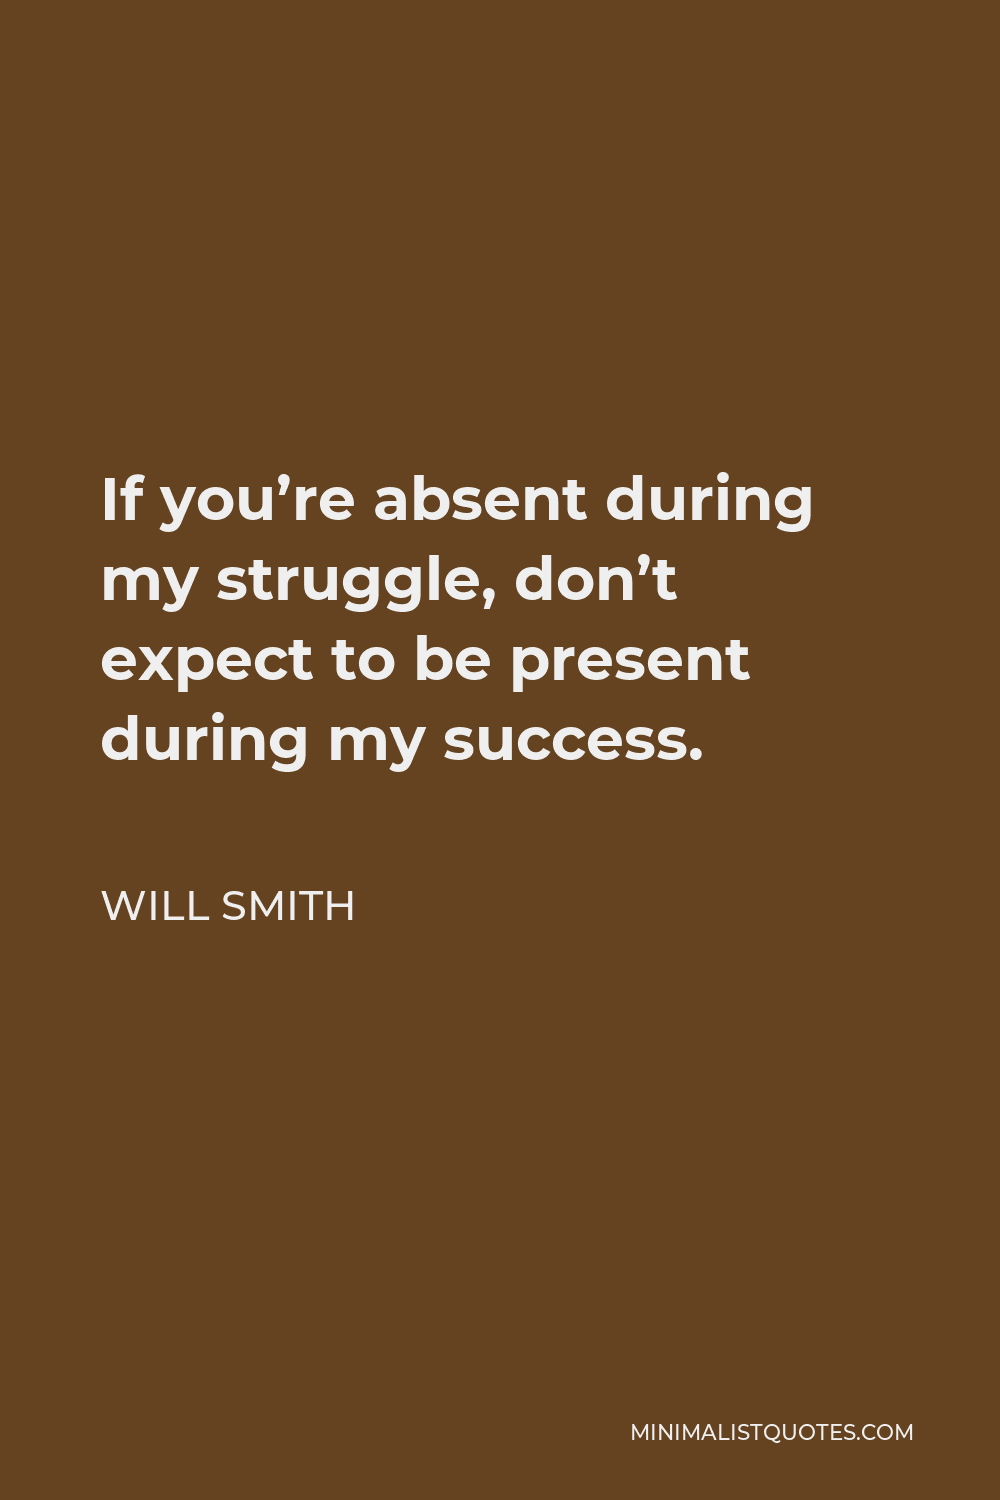 Will Smith Quote - If you’re absent during my struggle, don’t expect to be present during my success.